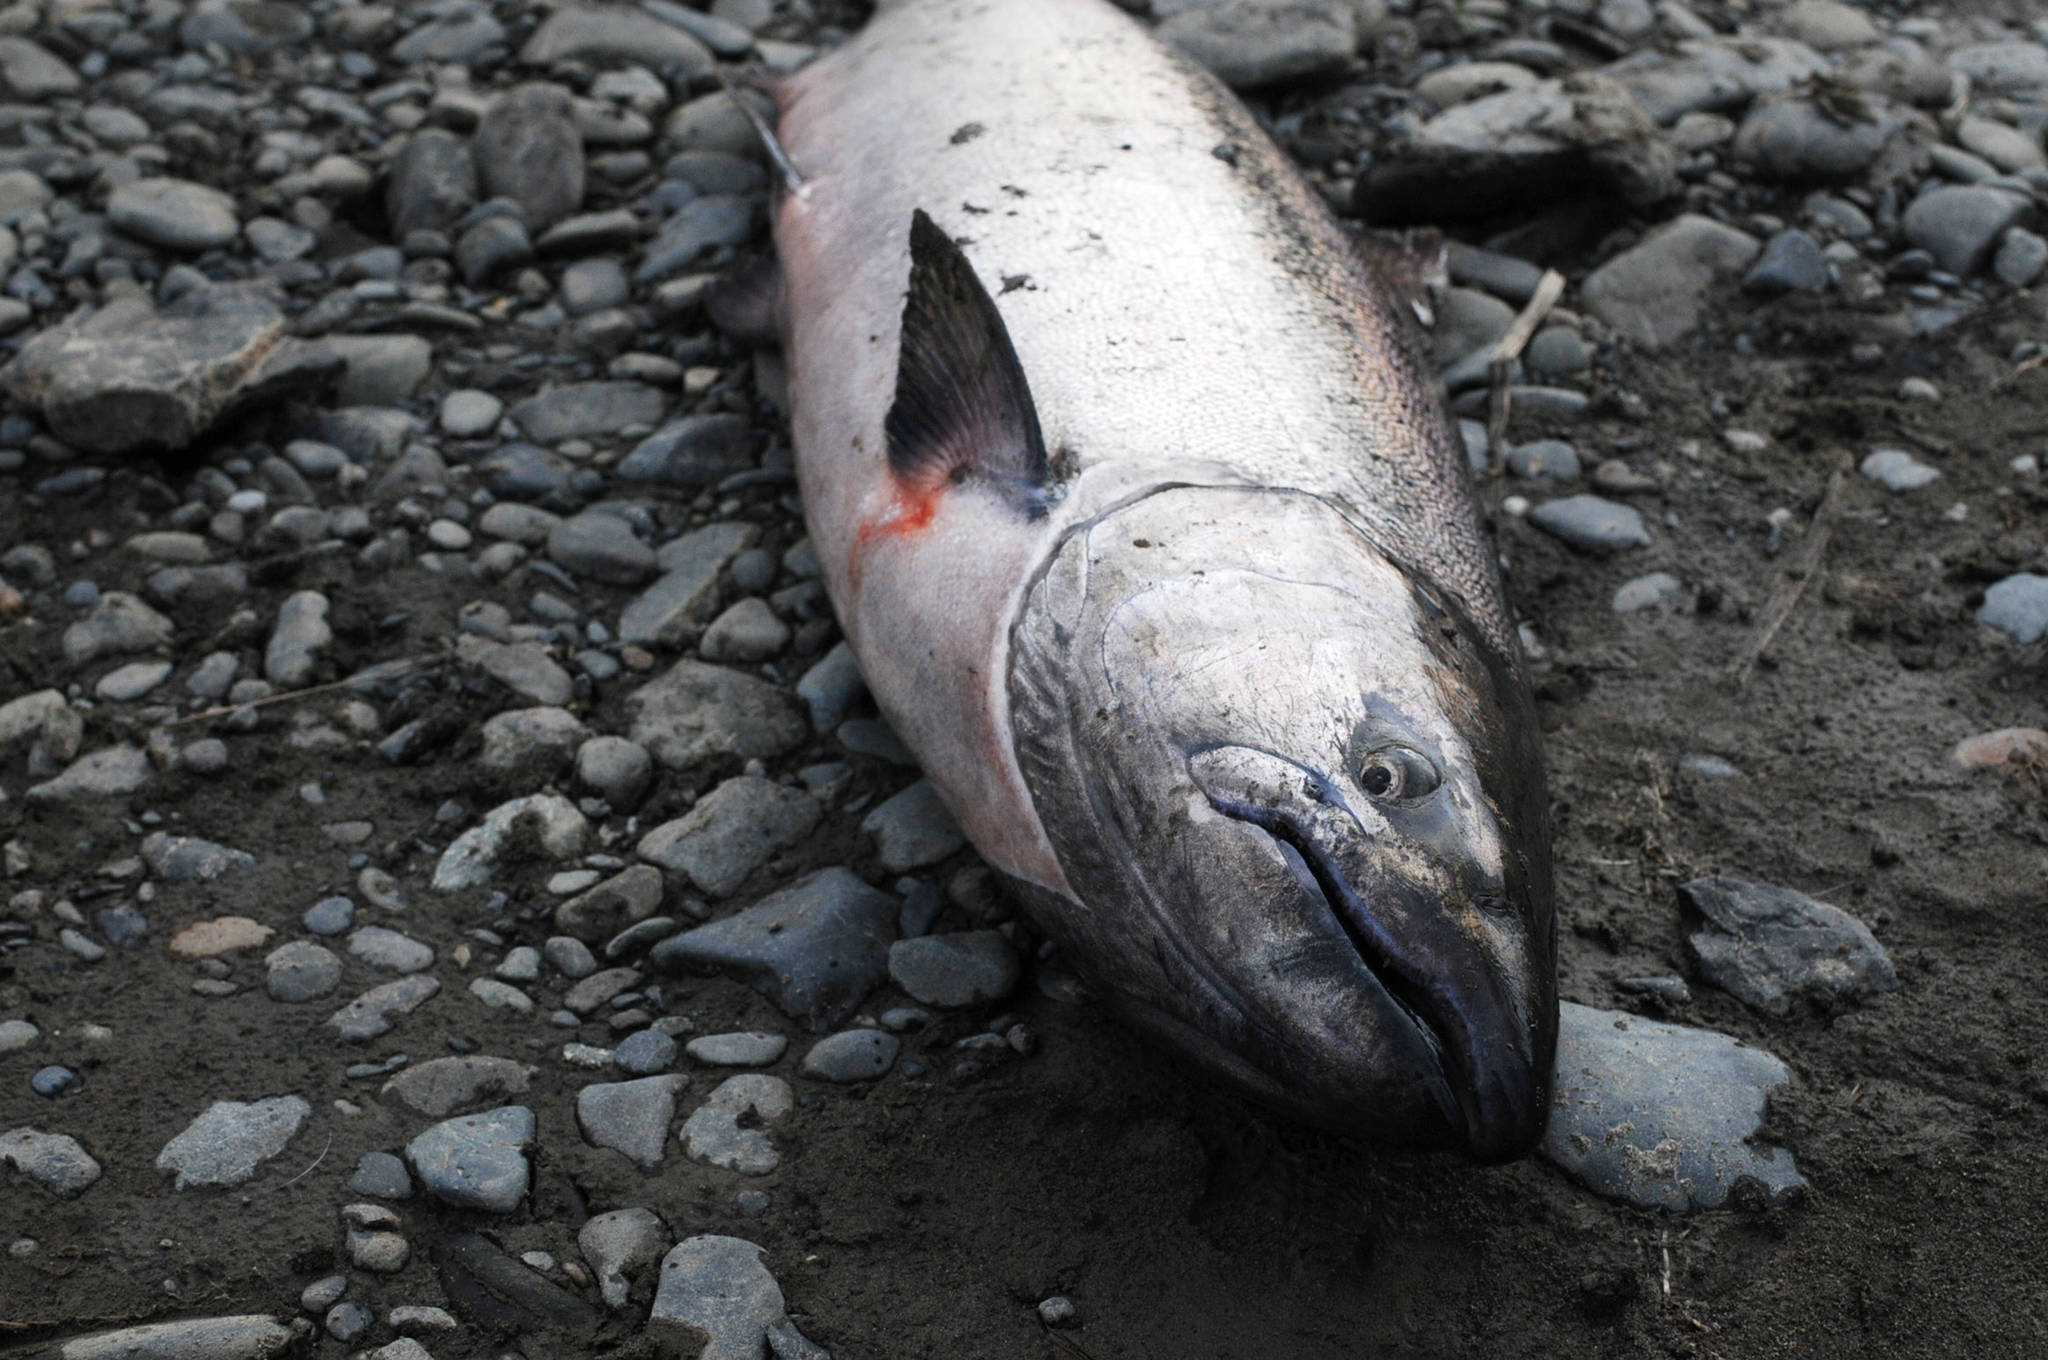 An Anchor River king salmon lies on the bank Saturday, May 19, 2018 in Anchor Point, Alaska. (Photo by Elizabeth Earl/Peninsula Clarion, file)